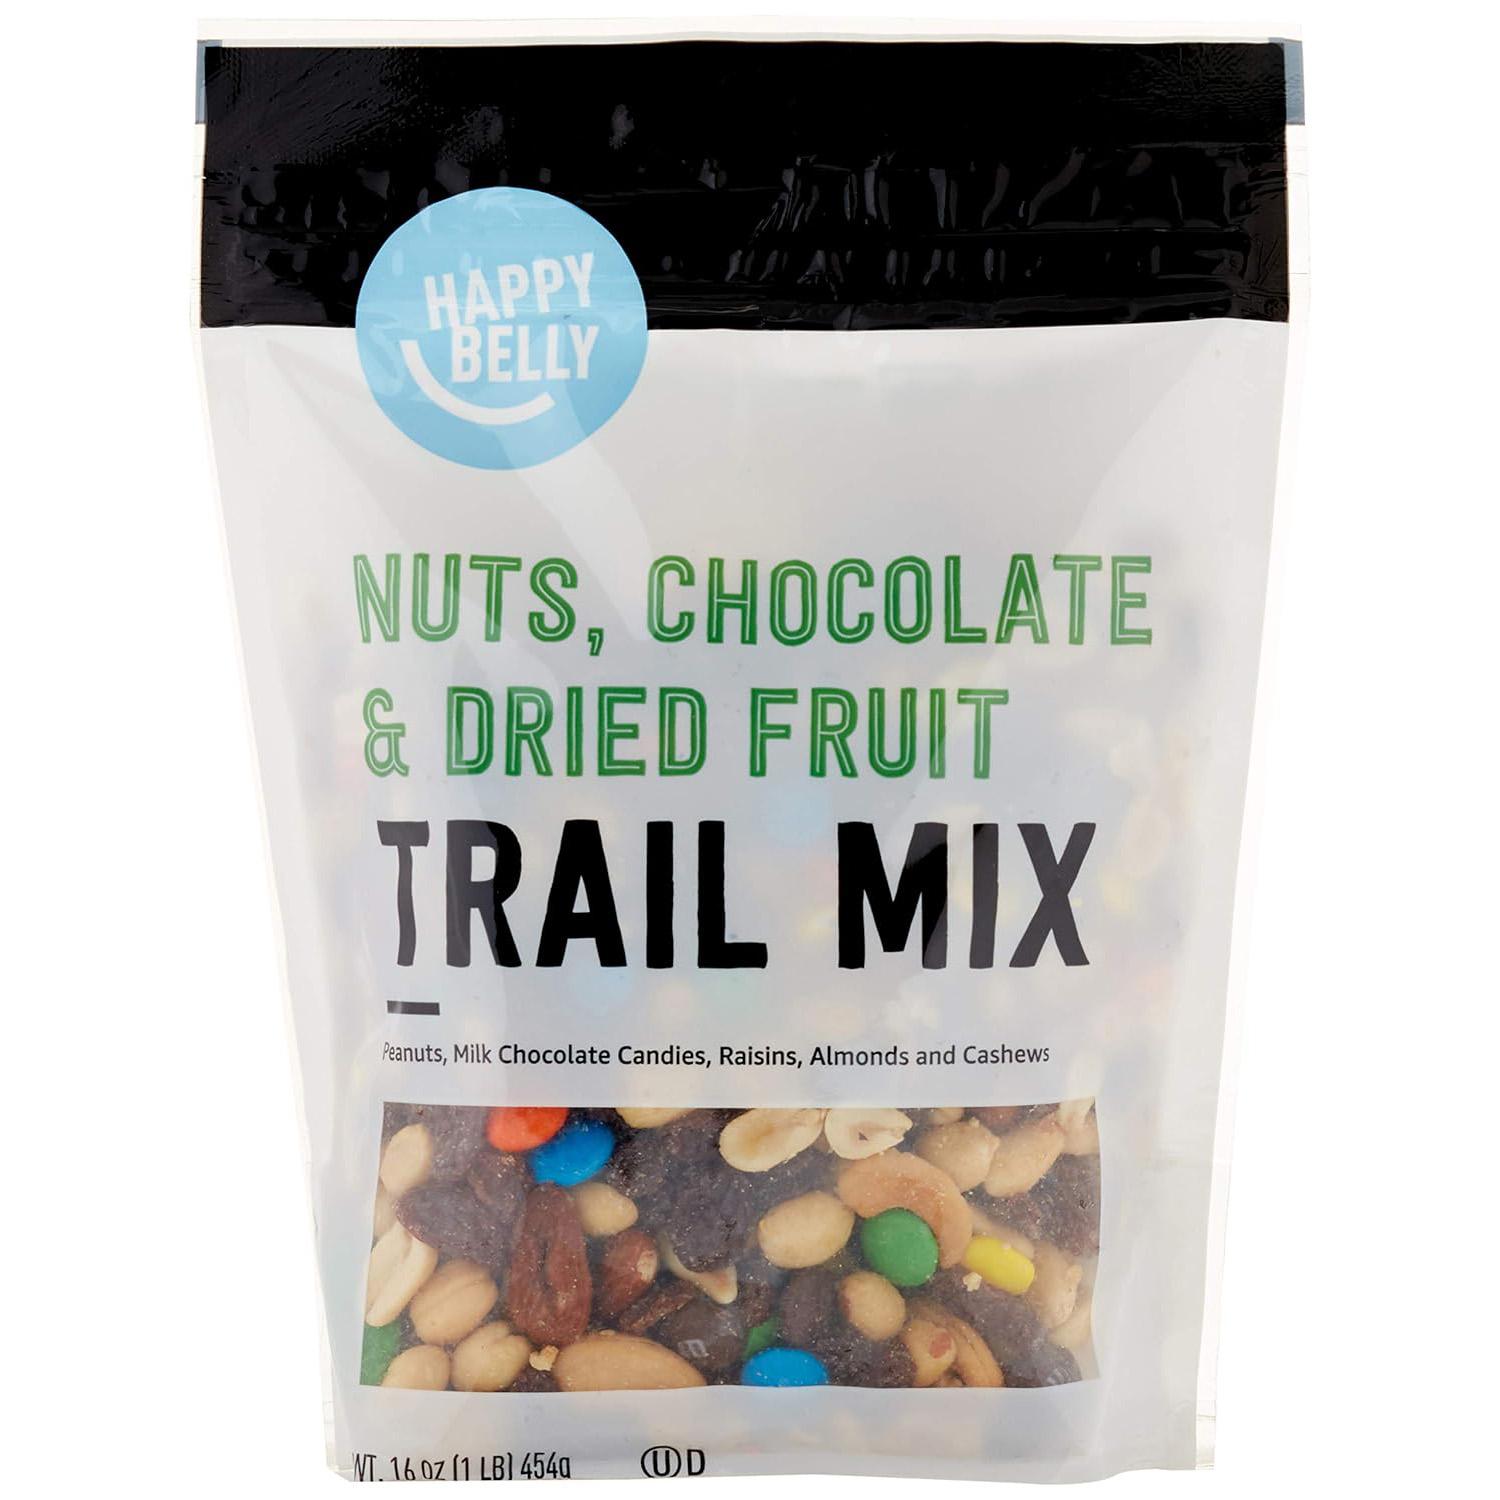 Happy Belly Nuts Chocolate and Dried Fruit Trail Mix for $5.61